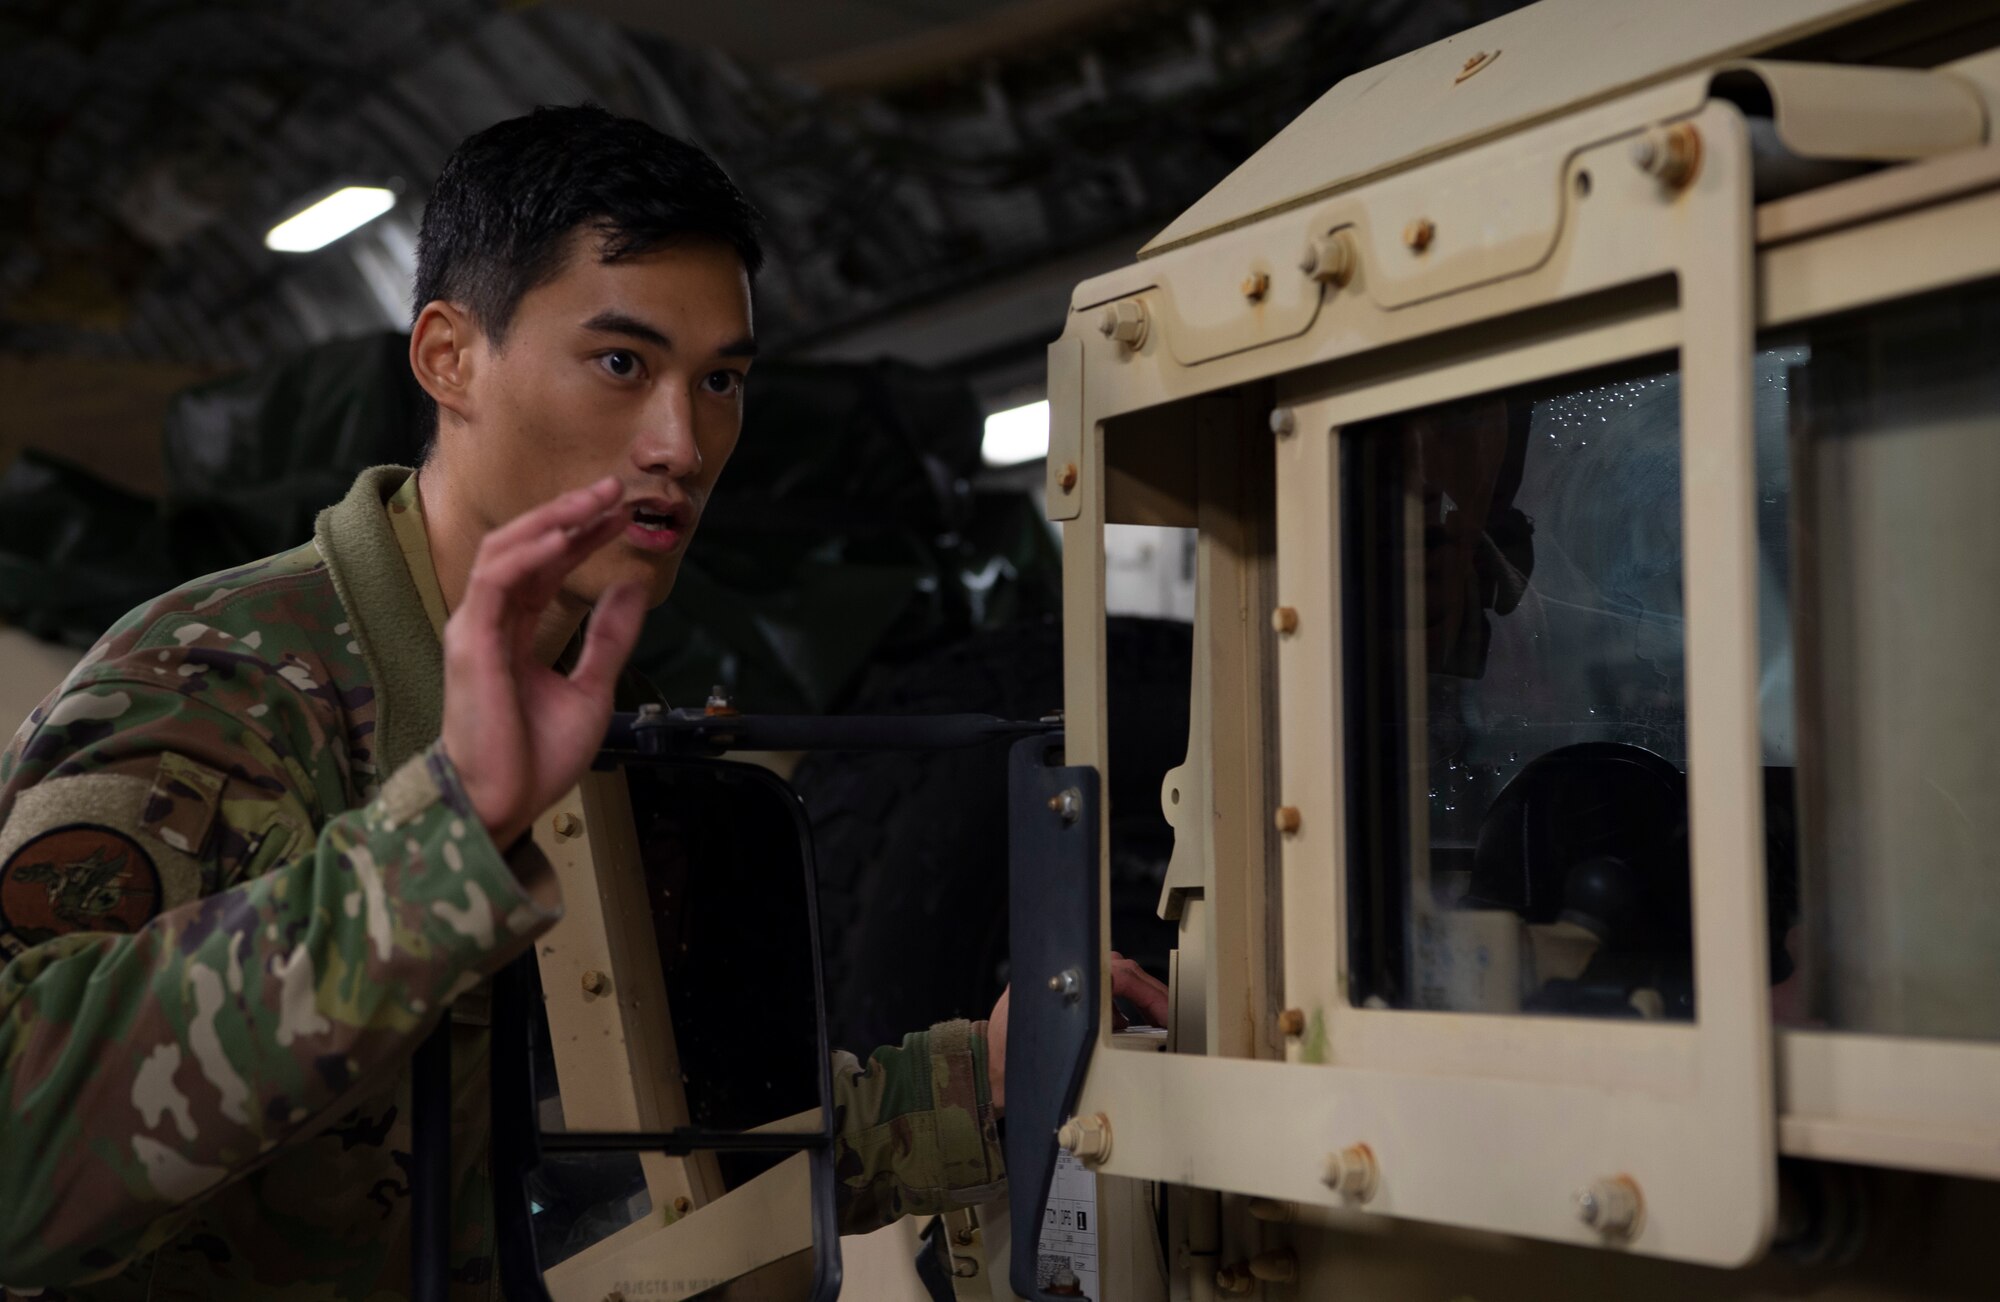 U.S. Air Force Senior Airman Keoni Gibson, 8th Airlift Squadron loadmaster, marshals a U.S. Army HUMVEE onto a C-17 Globemaster III during Exercise Rainier War 21B at Joint Base Lewis-McChord, Washington, Nov. 6, 2021. Rainier War 21B exercises and evaluates the wing’s ability to employ the force and their ability to perform during wartime and/or contingency taskings in a high-intensity, wartime contested, degraded and operationally limited environment while supporting the contingency operations against a near-peer adversary in the U.S. Indo-Pacific Command area of responsibility. (U.S. Air Force photo by Staff Sgt. Tryphena Mayhugh)